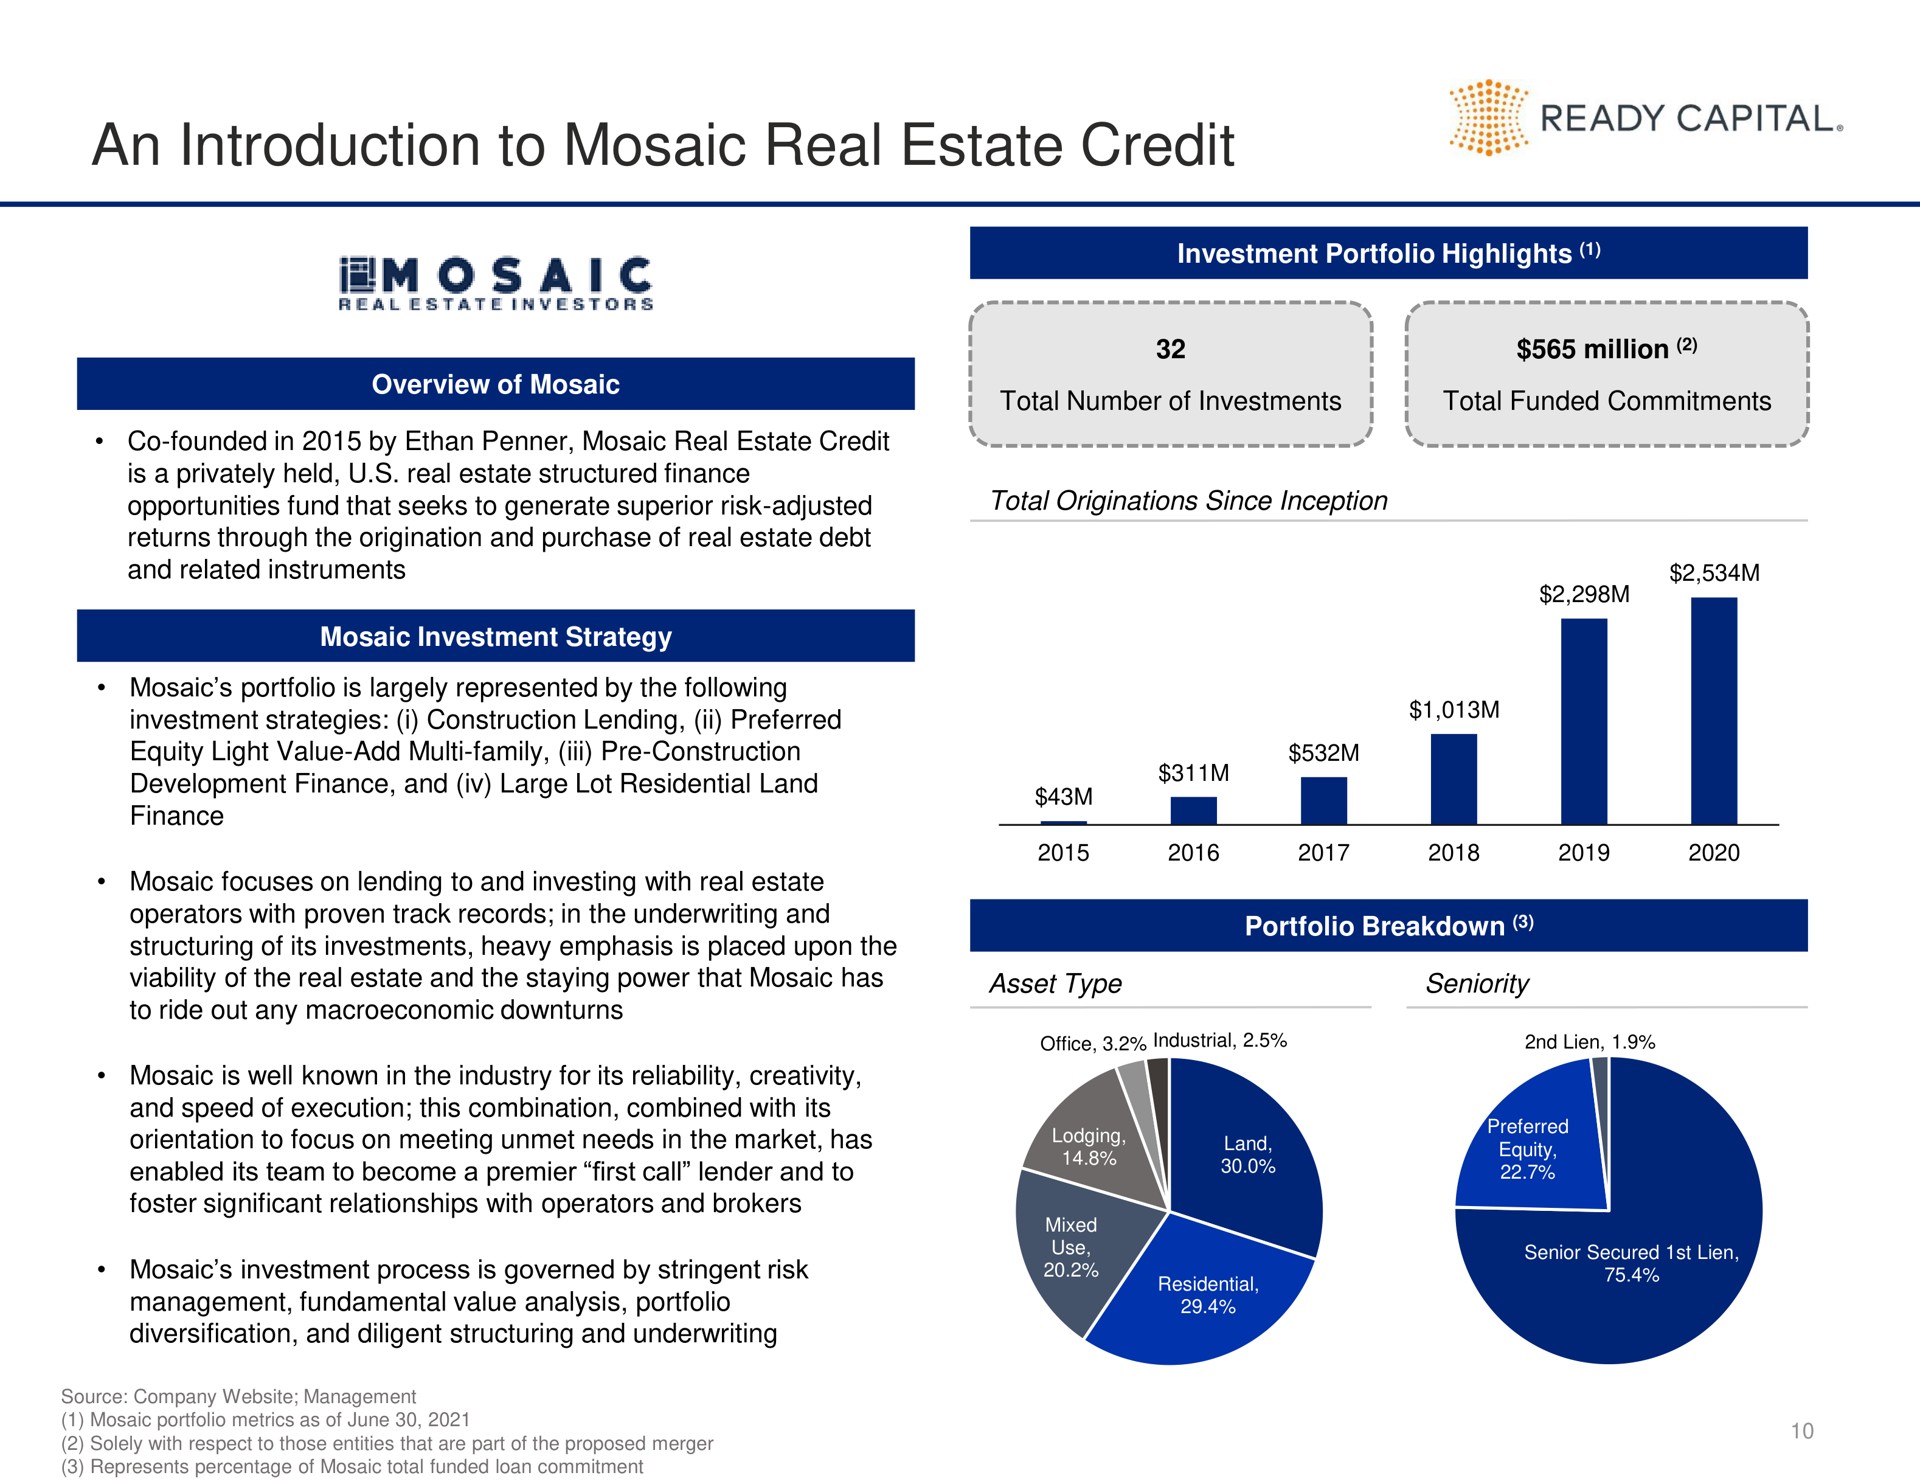 an introduction to mosaic real estate credit ready capital | Ready Capital